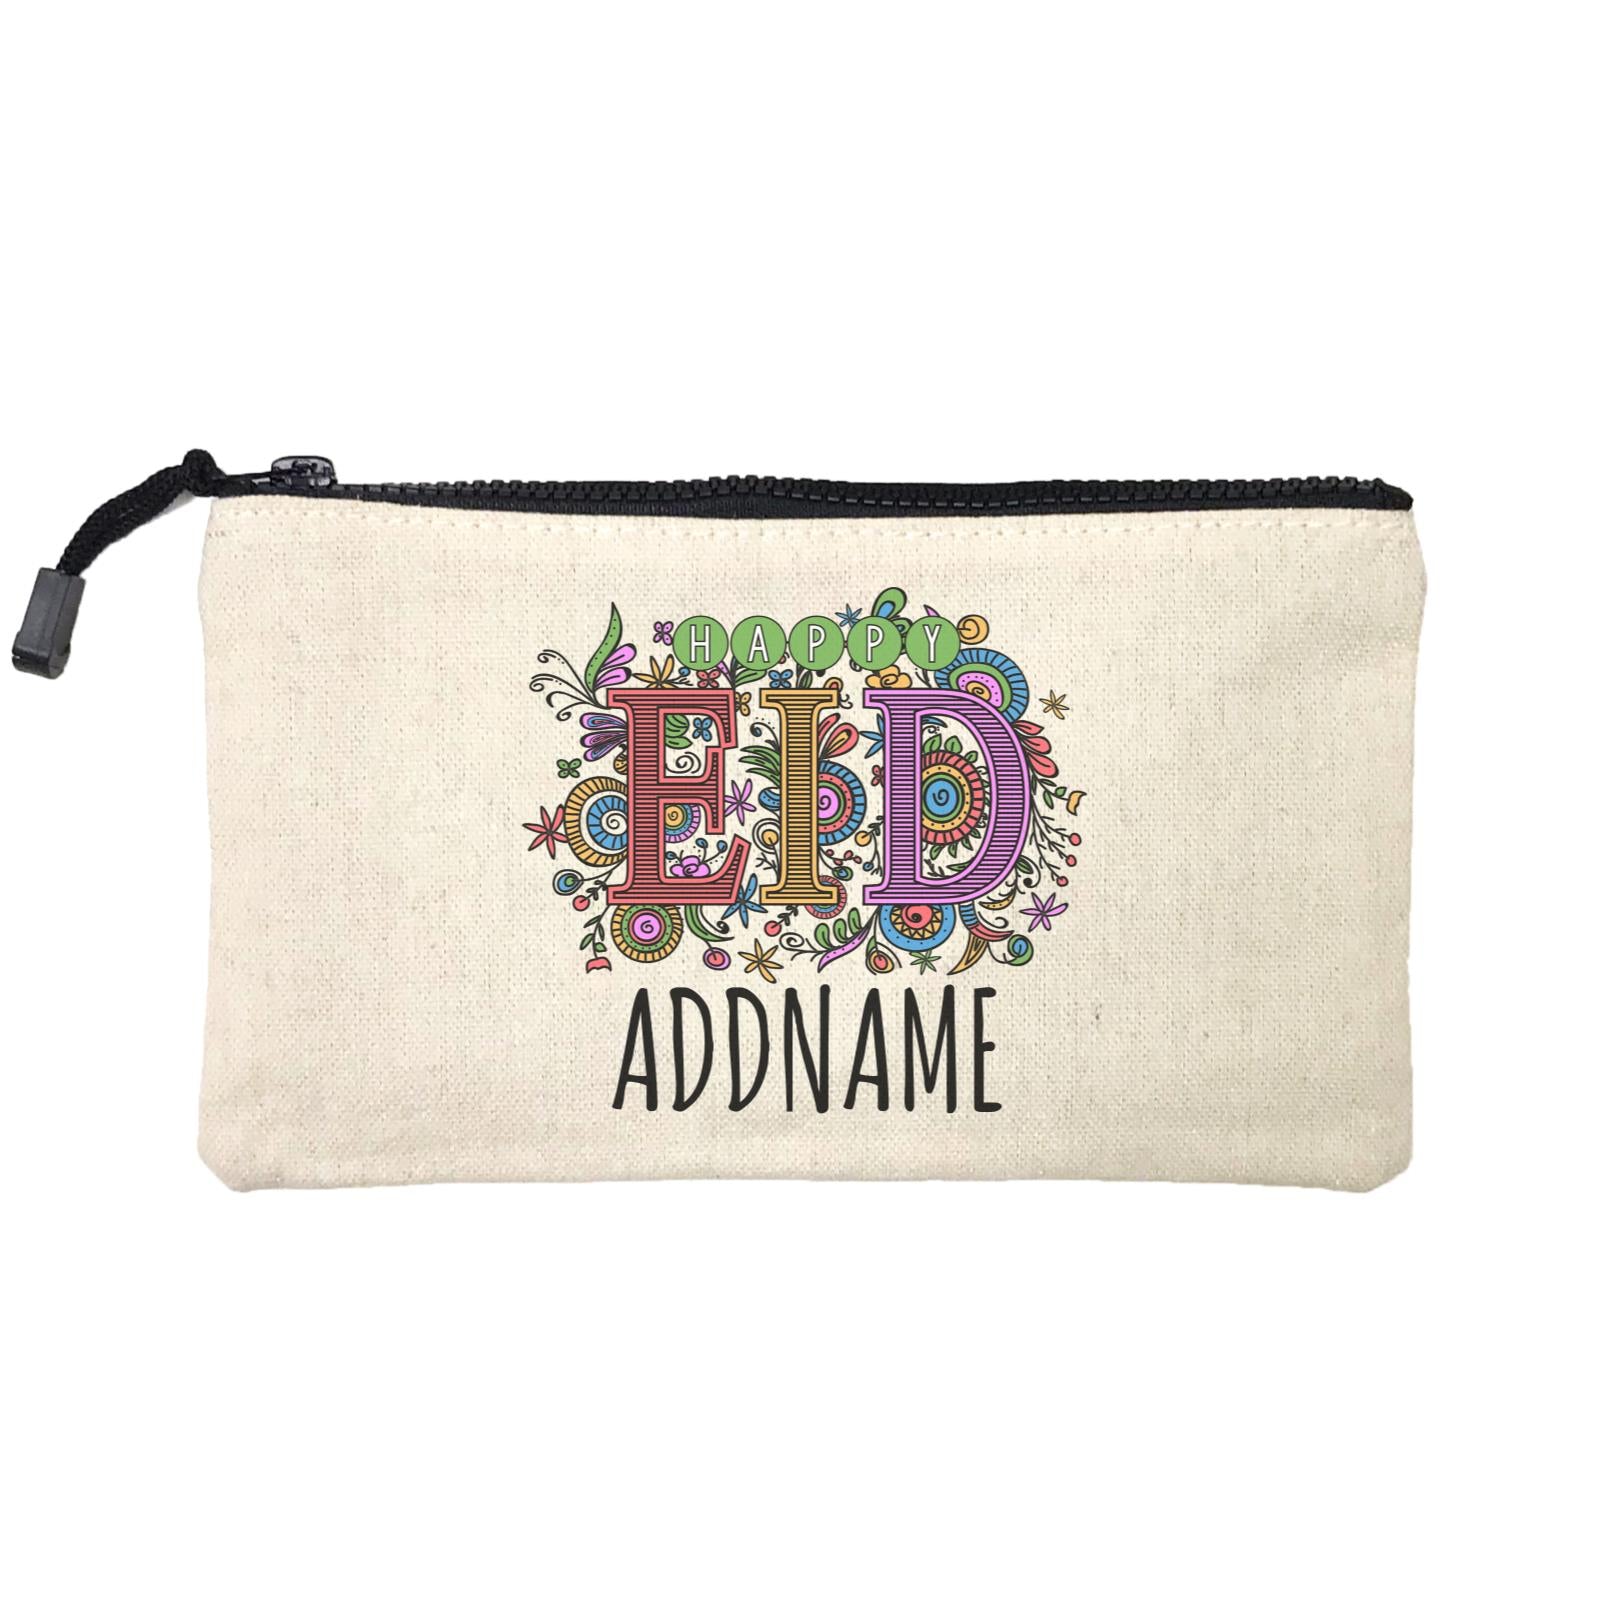 Happy EID Addname Mini Accessories Stationery Pouch